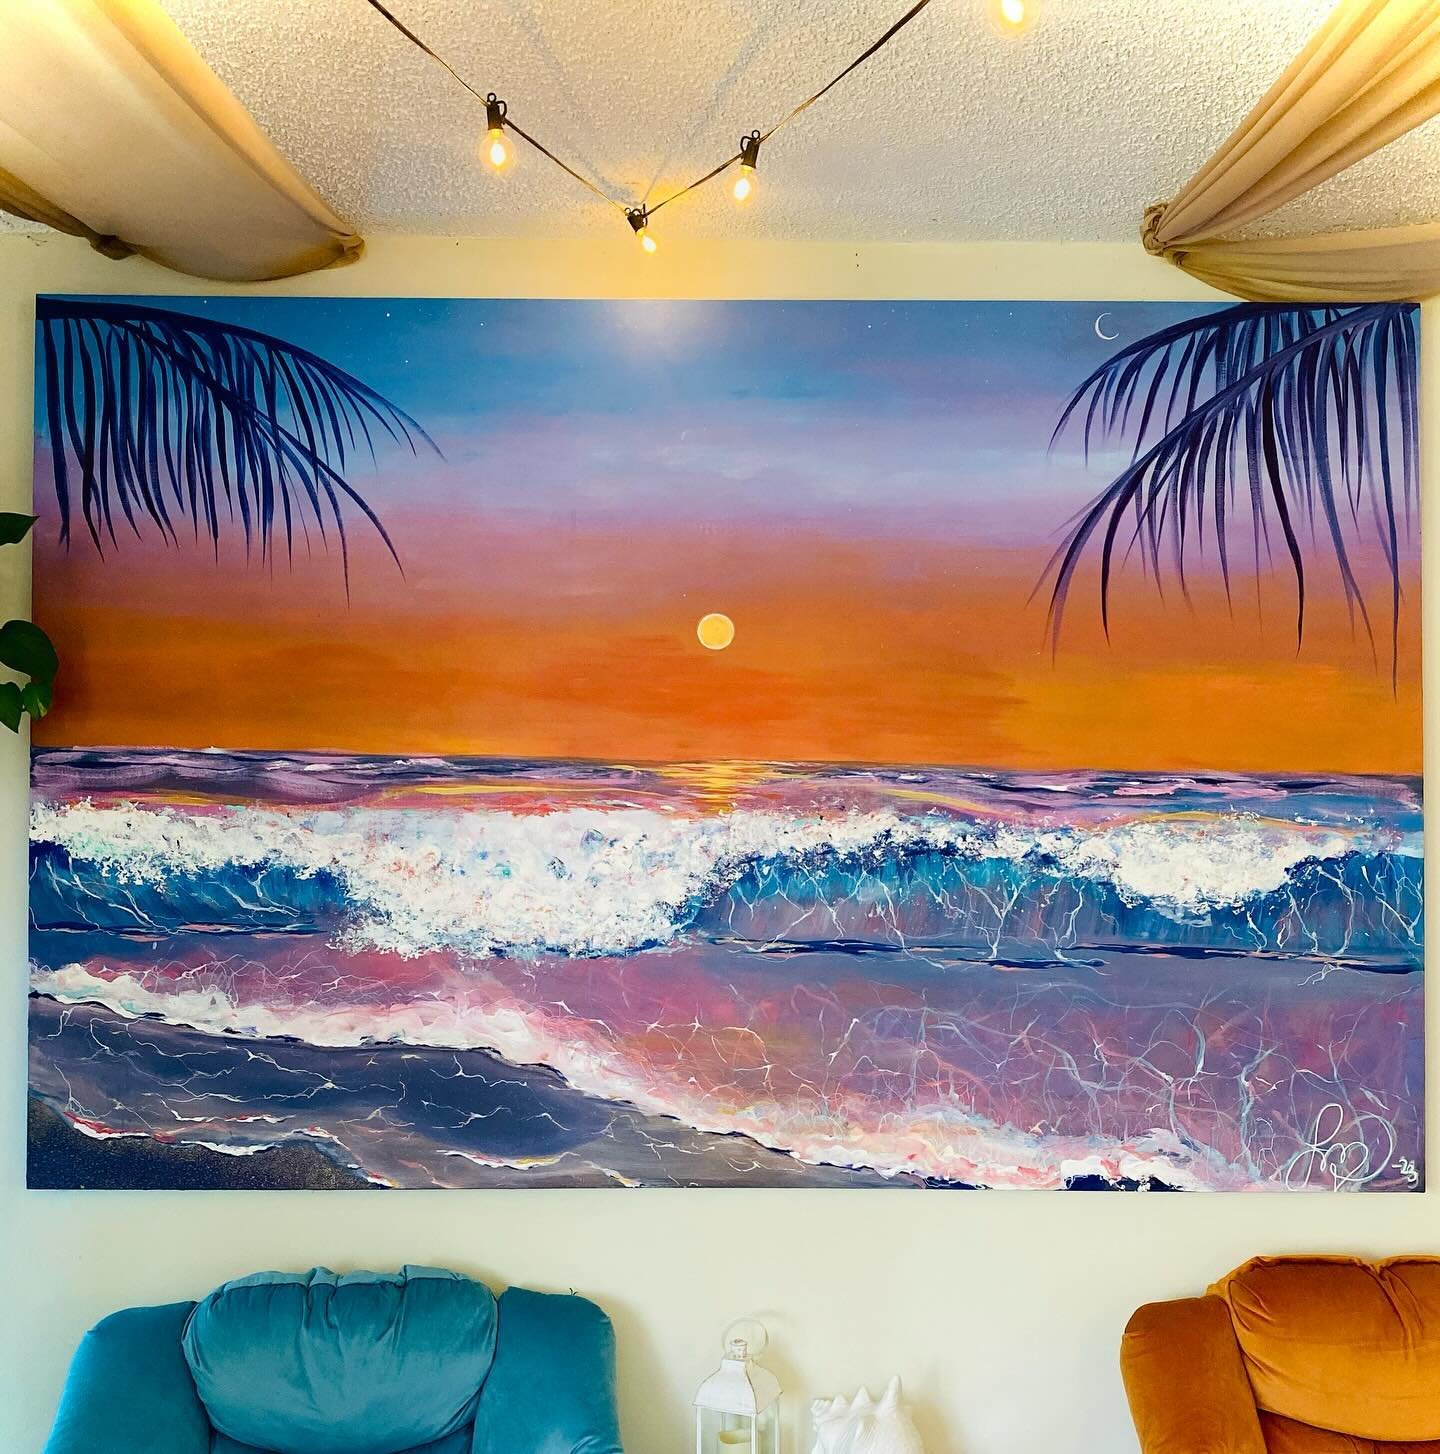 Okay but which custom painting is your favorite?? 😍😭🌊

Thank you Faye for creating these gorgeous masterpieces!